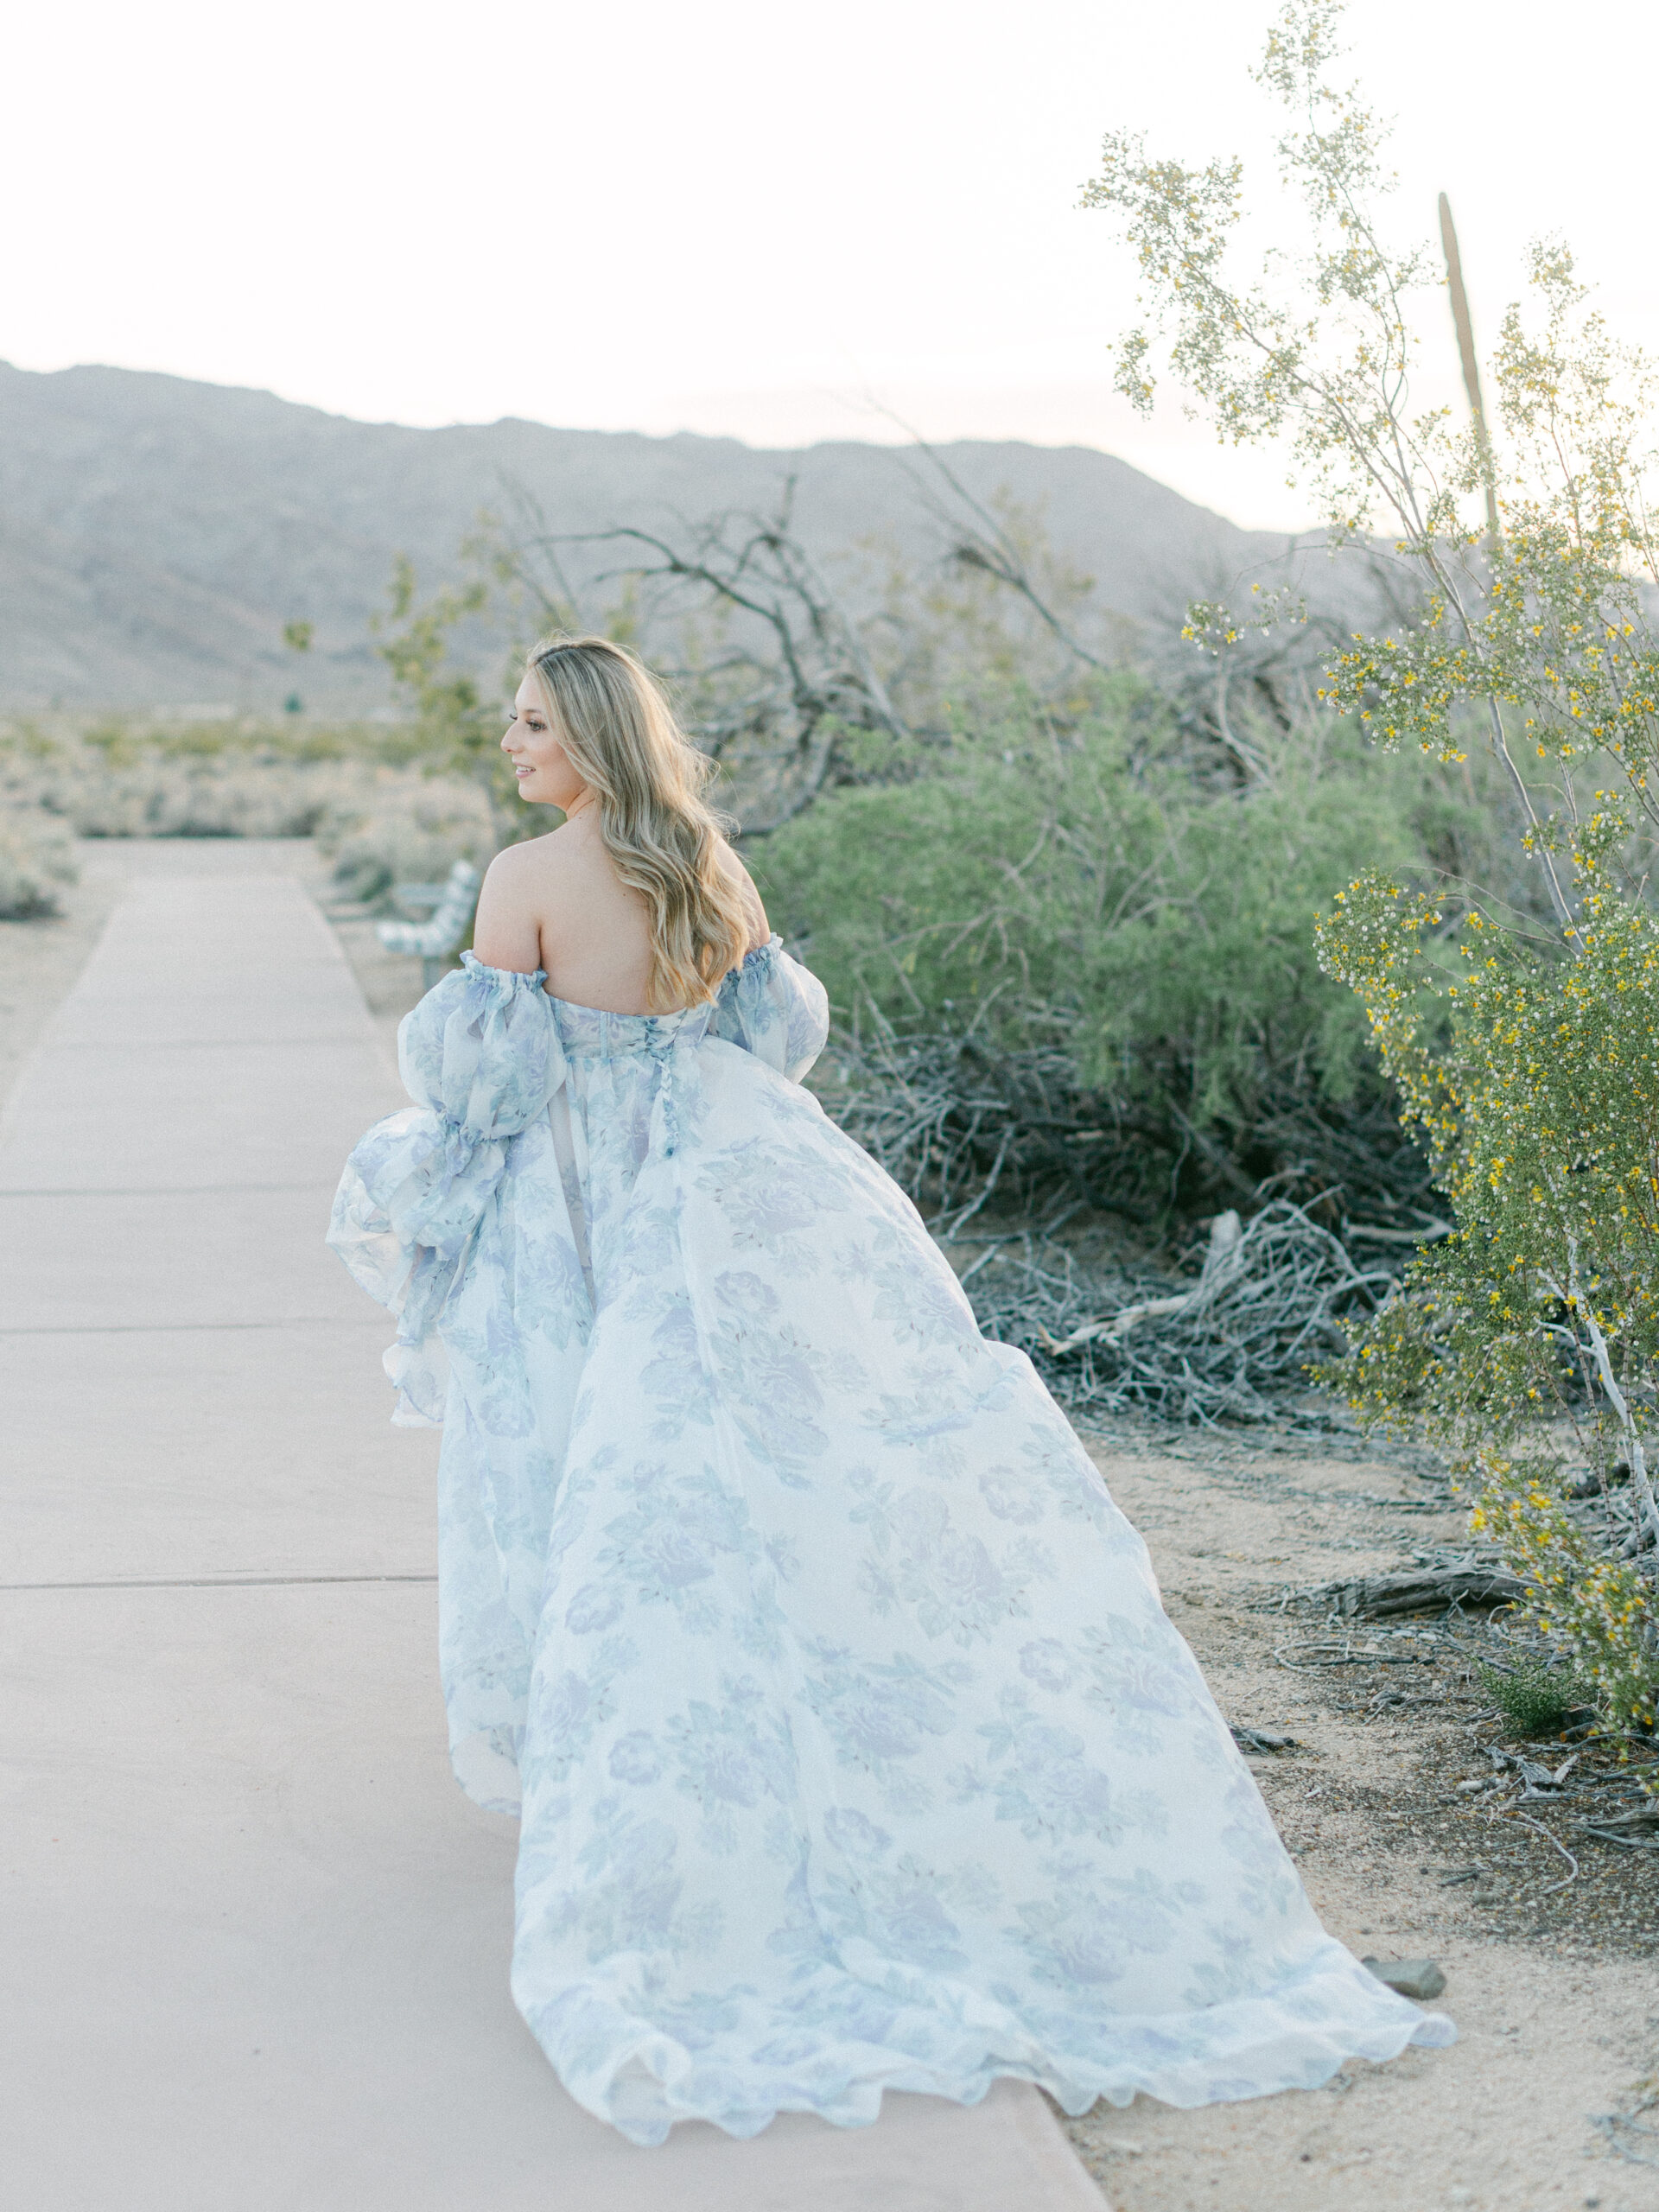 MATERNITY SESSION AT OASIS OF MARA IN TWENTYNINE PALMS, CALIFORNIA BY ELIZABETH KANE PHOTOGRAPHY